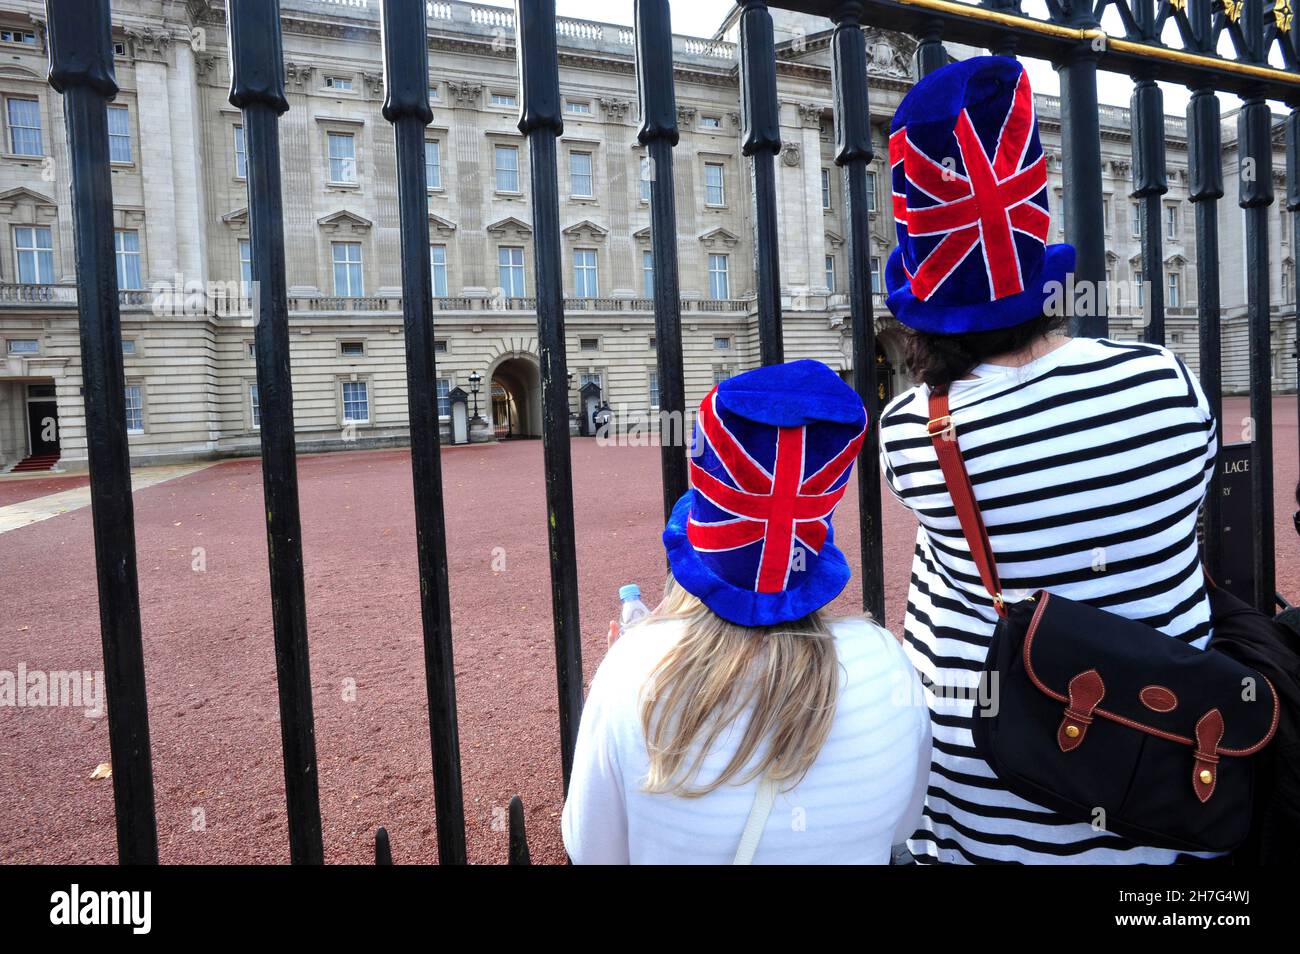 GREAT BRITAIN. LONDON. YOUNG WOMEN IN FRONT OF THE FENCES OF BUCKINGHAM PALACE. THE ROYAL FAMILY IS STILL VERY POPULAR AND HAS A REAL ECONOMIC VALUE. Stock Photo